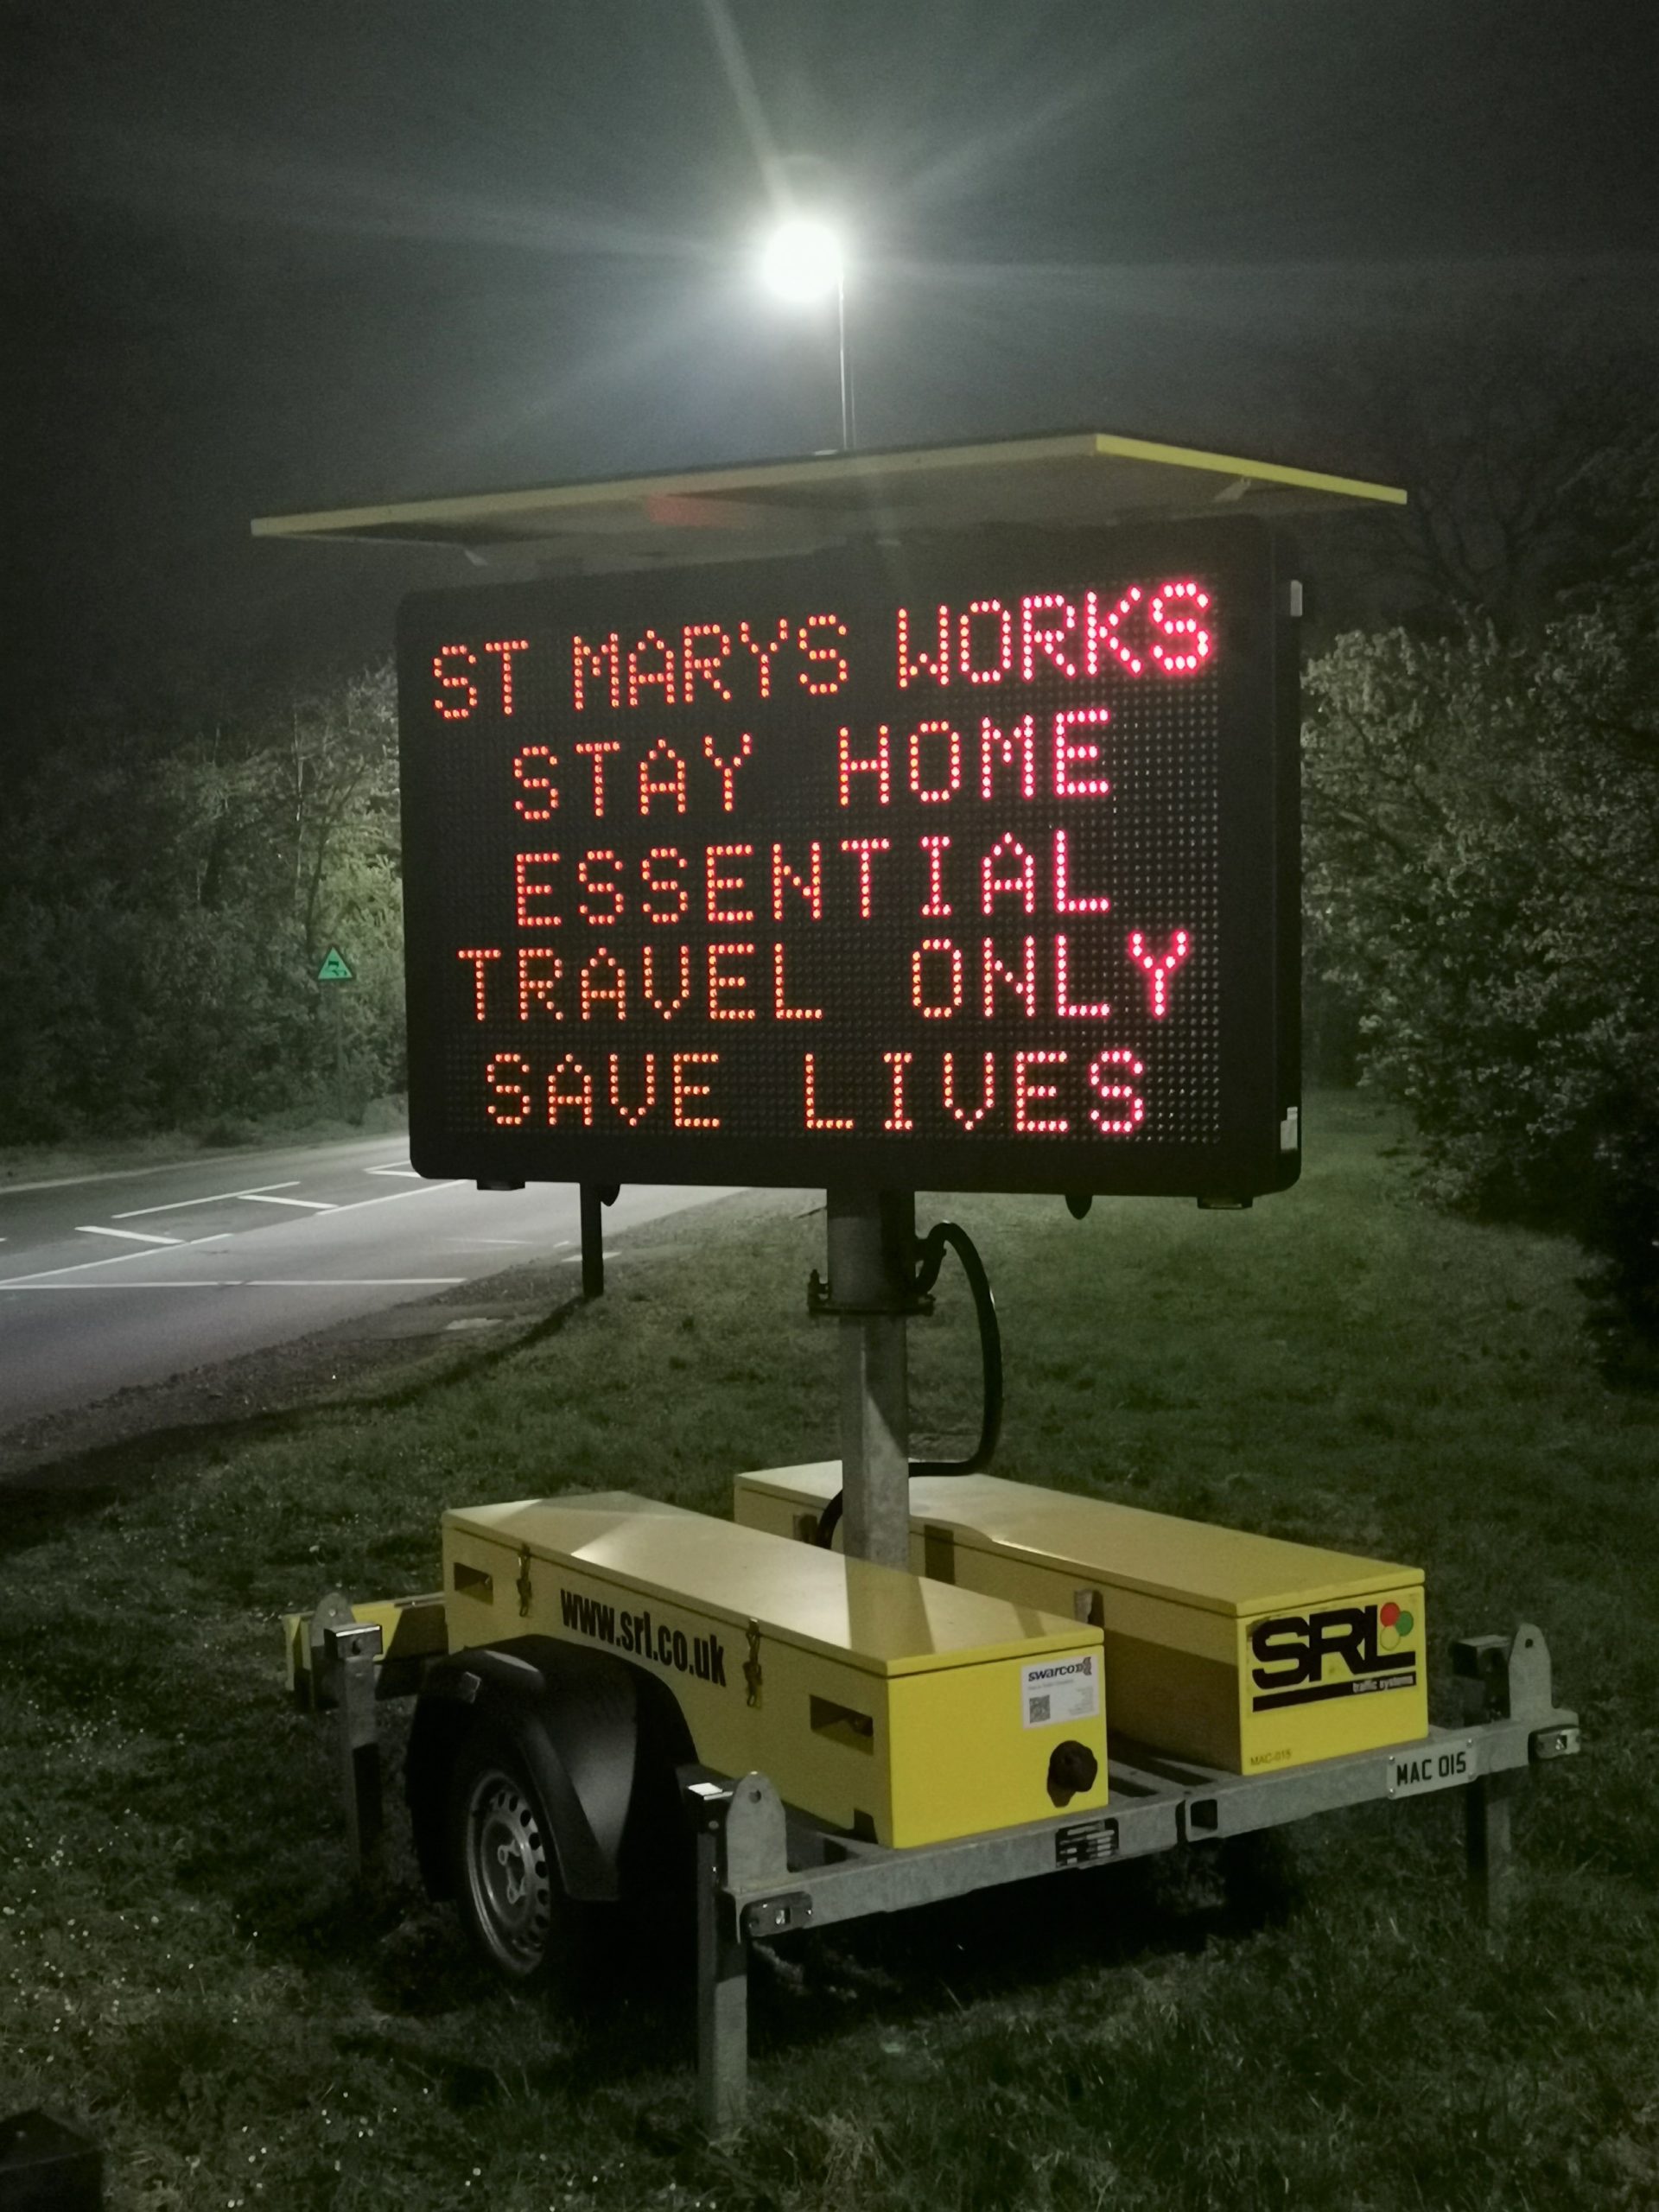 Photo showing essential health messaging on VMS signs on the roadside near St Mary's advising people to stay home, essential travel only, save lives. Photo taken at night.